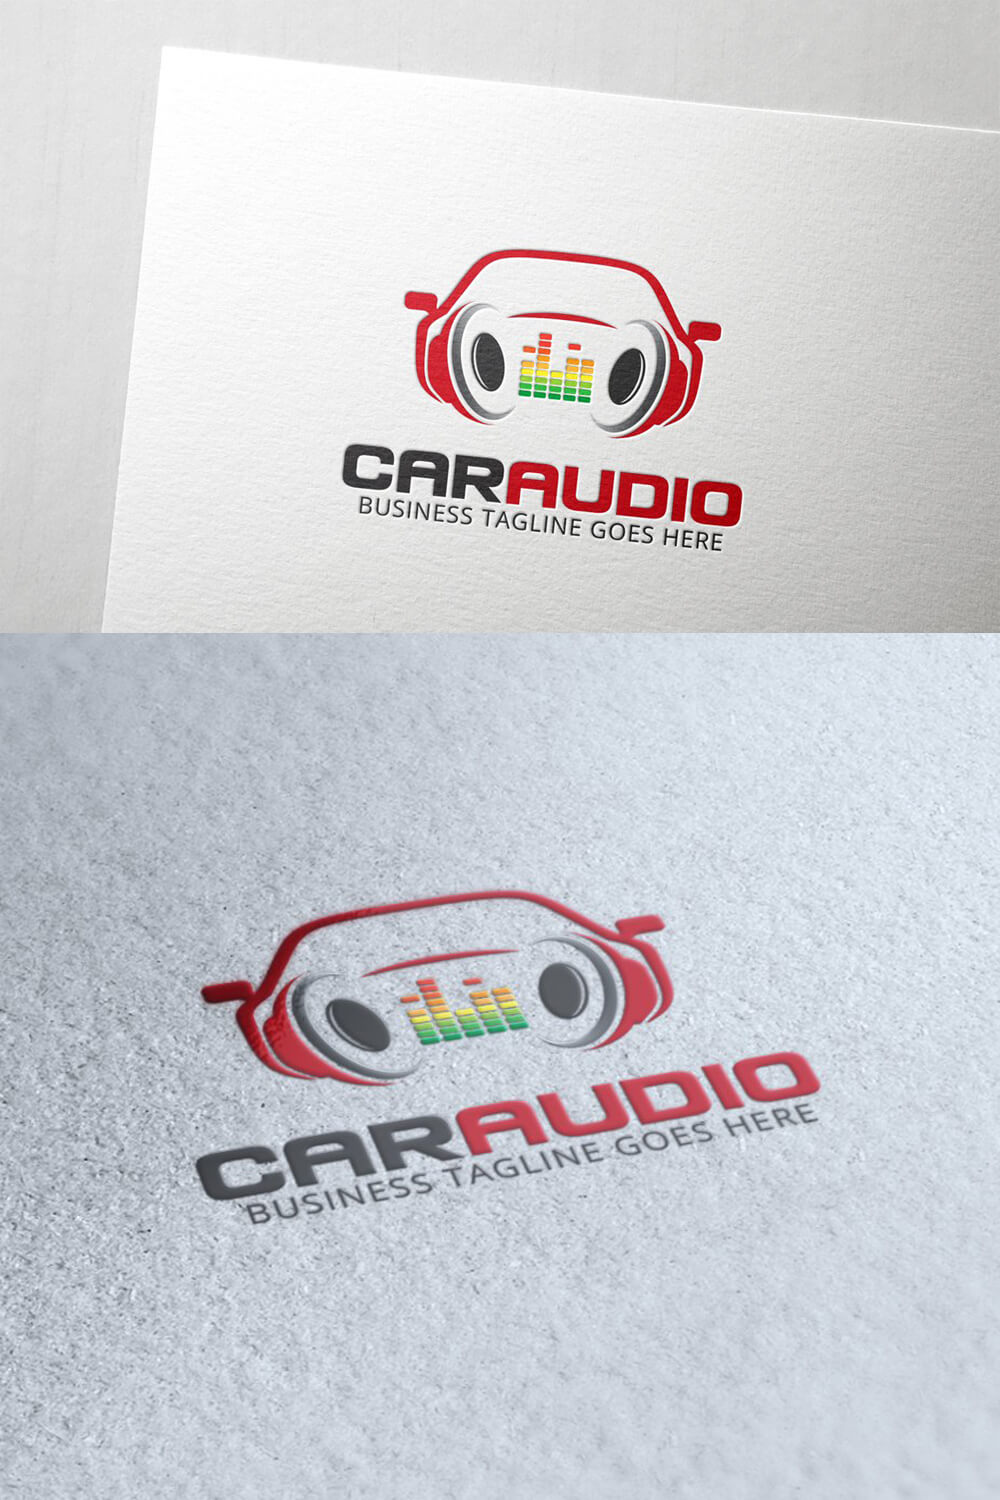 Colored Caraudio logo on white and gray backgrounds.